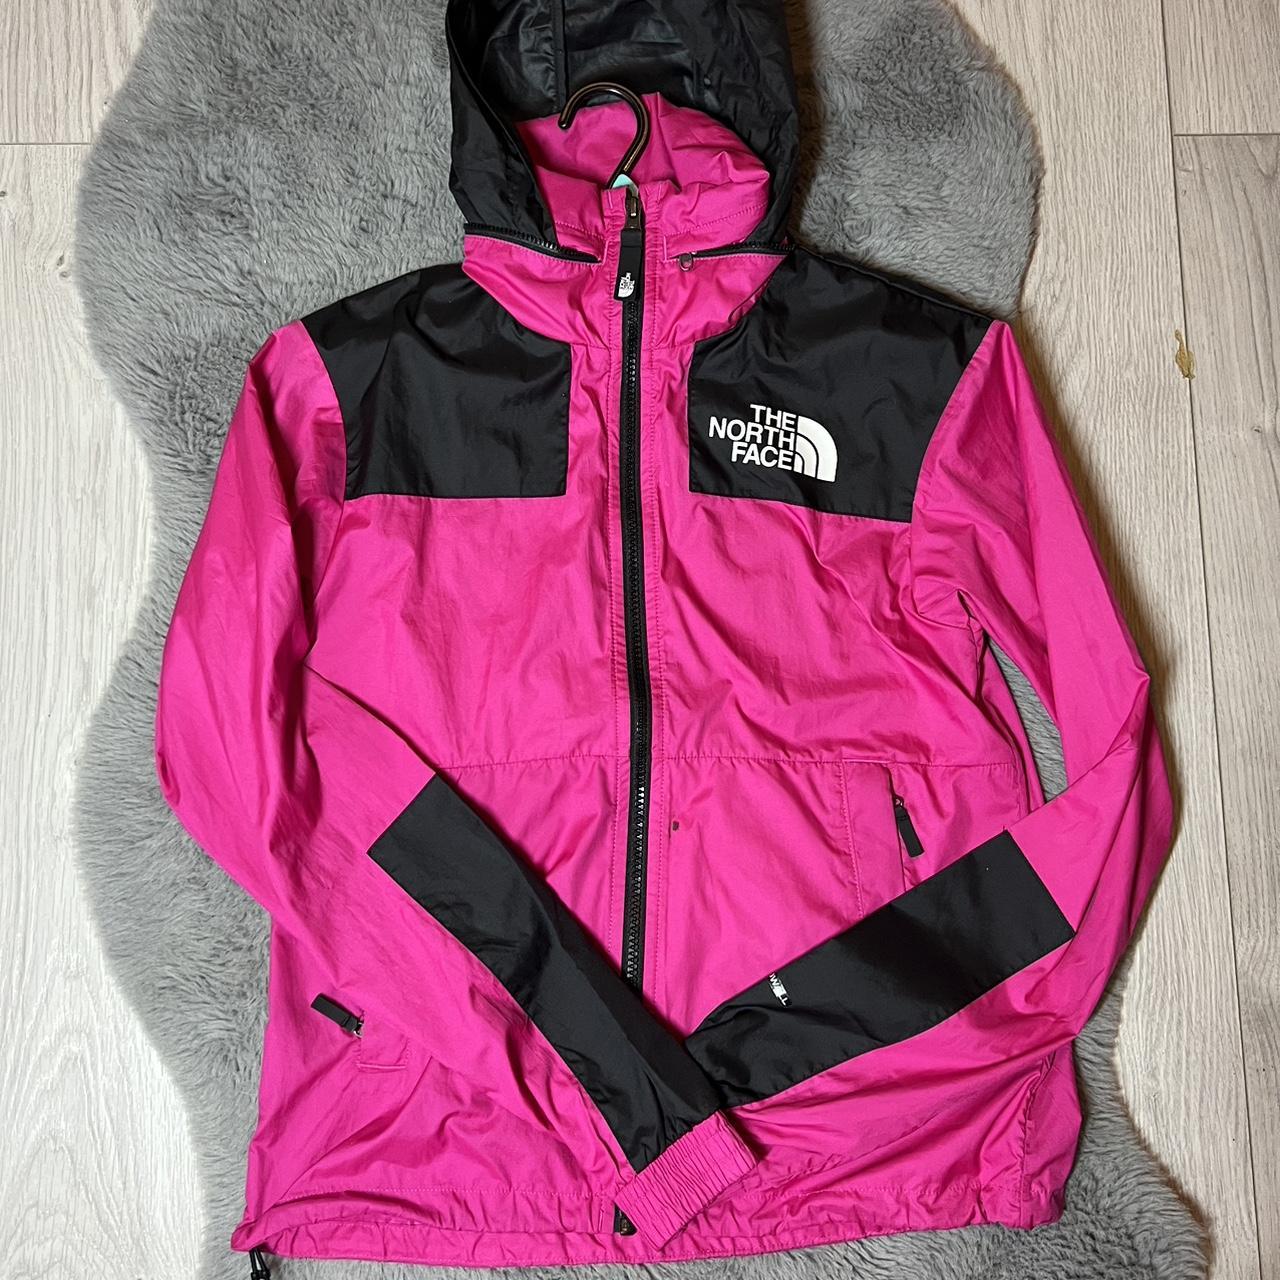 Selling this Bright Pink North Face Windbreaker,... - Depop